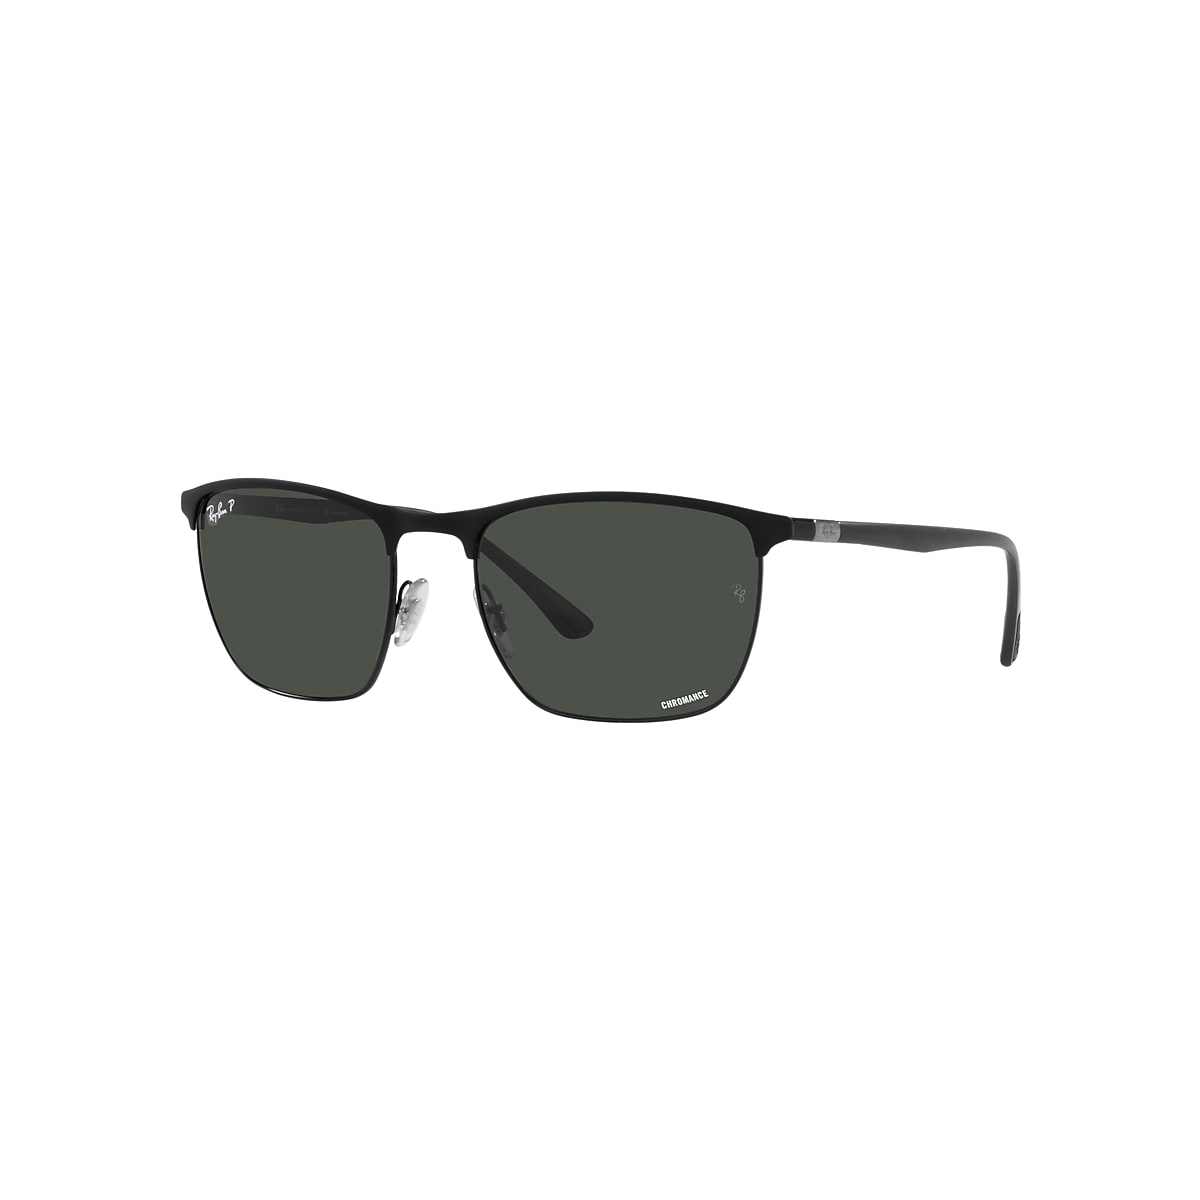 RB3686 CHROMANCE Sunglasses in Black and Grey - RB3686 | Ray-Ban® US